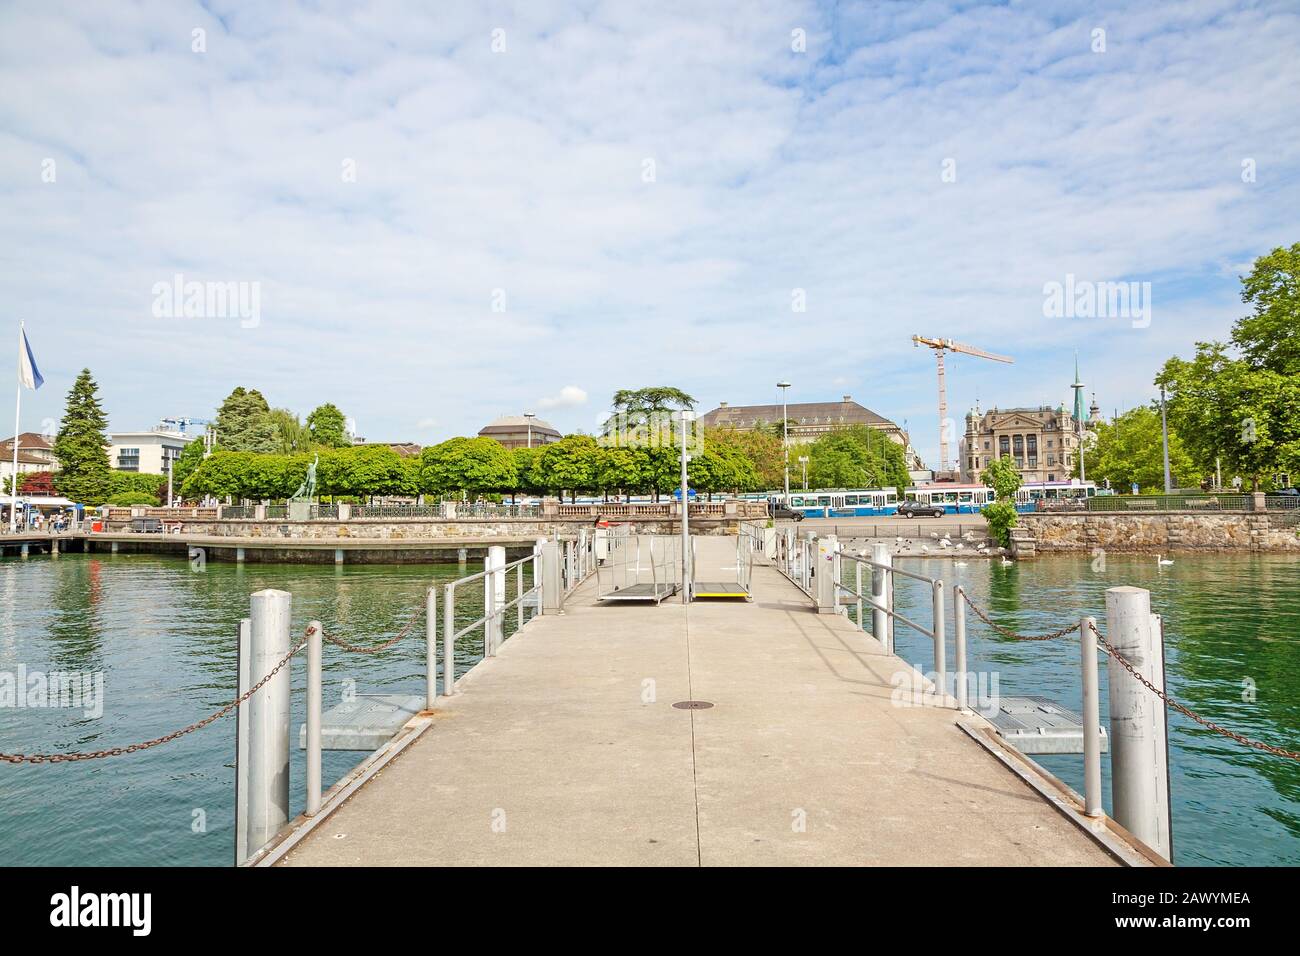 Zurich, Switzerland - June 10, 2017: Shipping pier at Burkliplatz, where excursion ships starts for boat trips over Lake Zurich and river Limmat. View Stock Photo